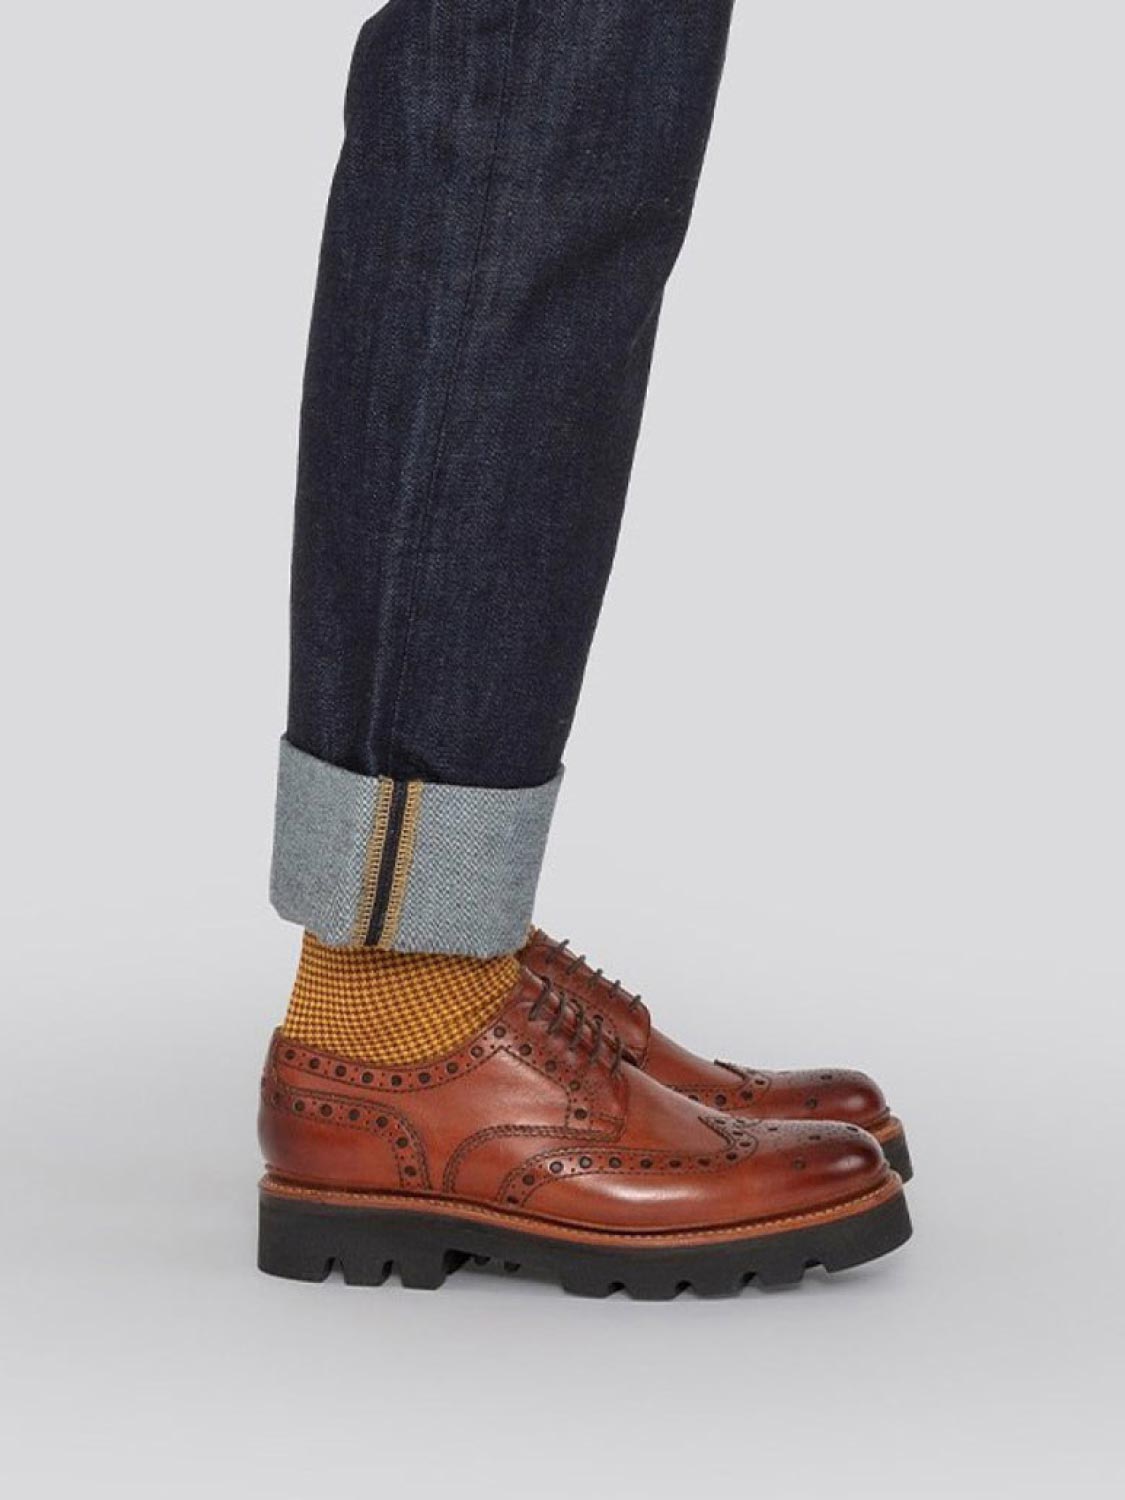 https://www.theprojectgarments.com/cdn/shop/products/Grenson_Archie_Tan_Calf_Leather_The_Project_Garments_D_2400x.jpg?v=1644321176